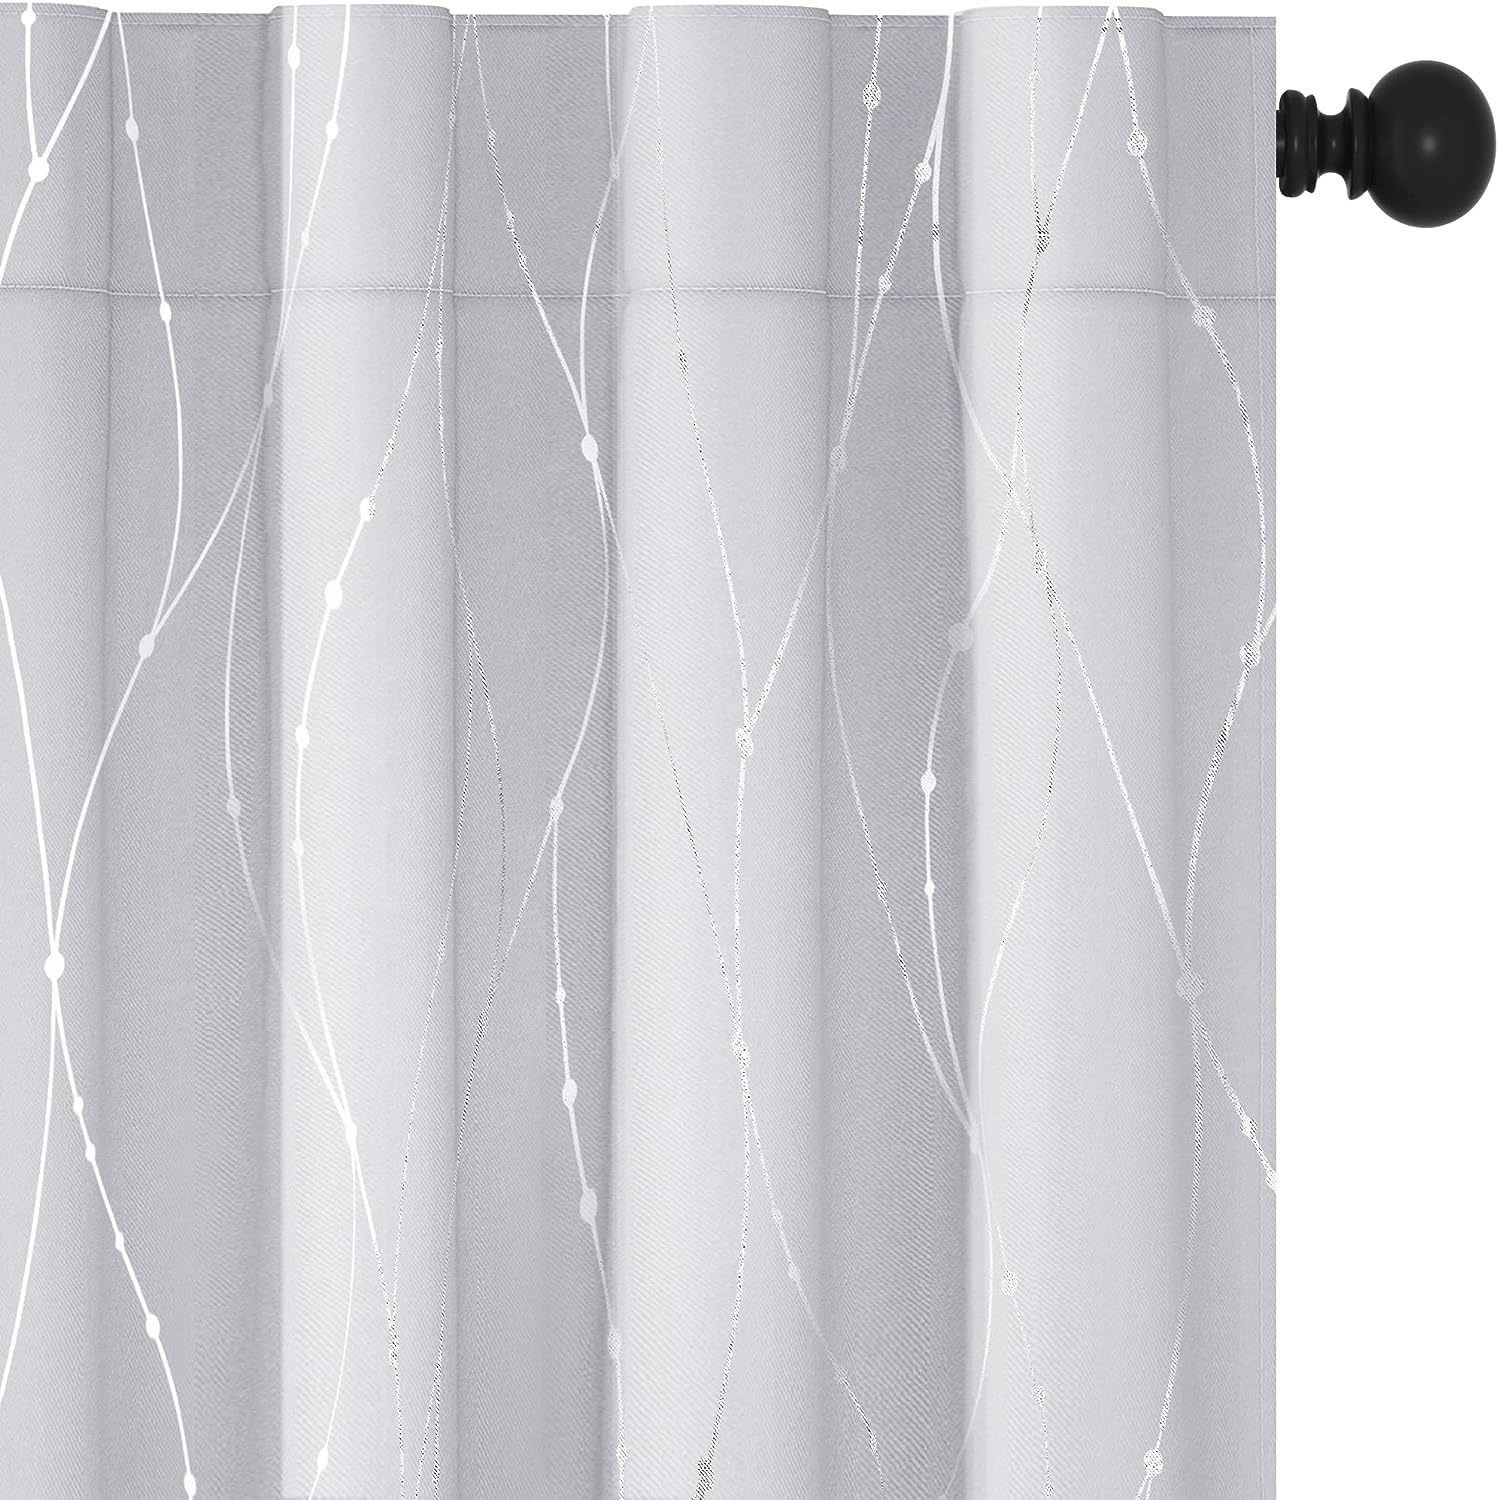 Deconovo White Curtains 84 Inches Long For Bedroom, Living Room Curtains And - $44.97